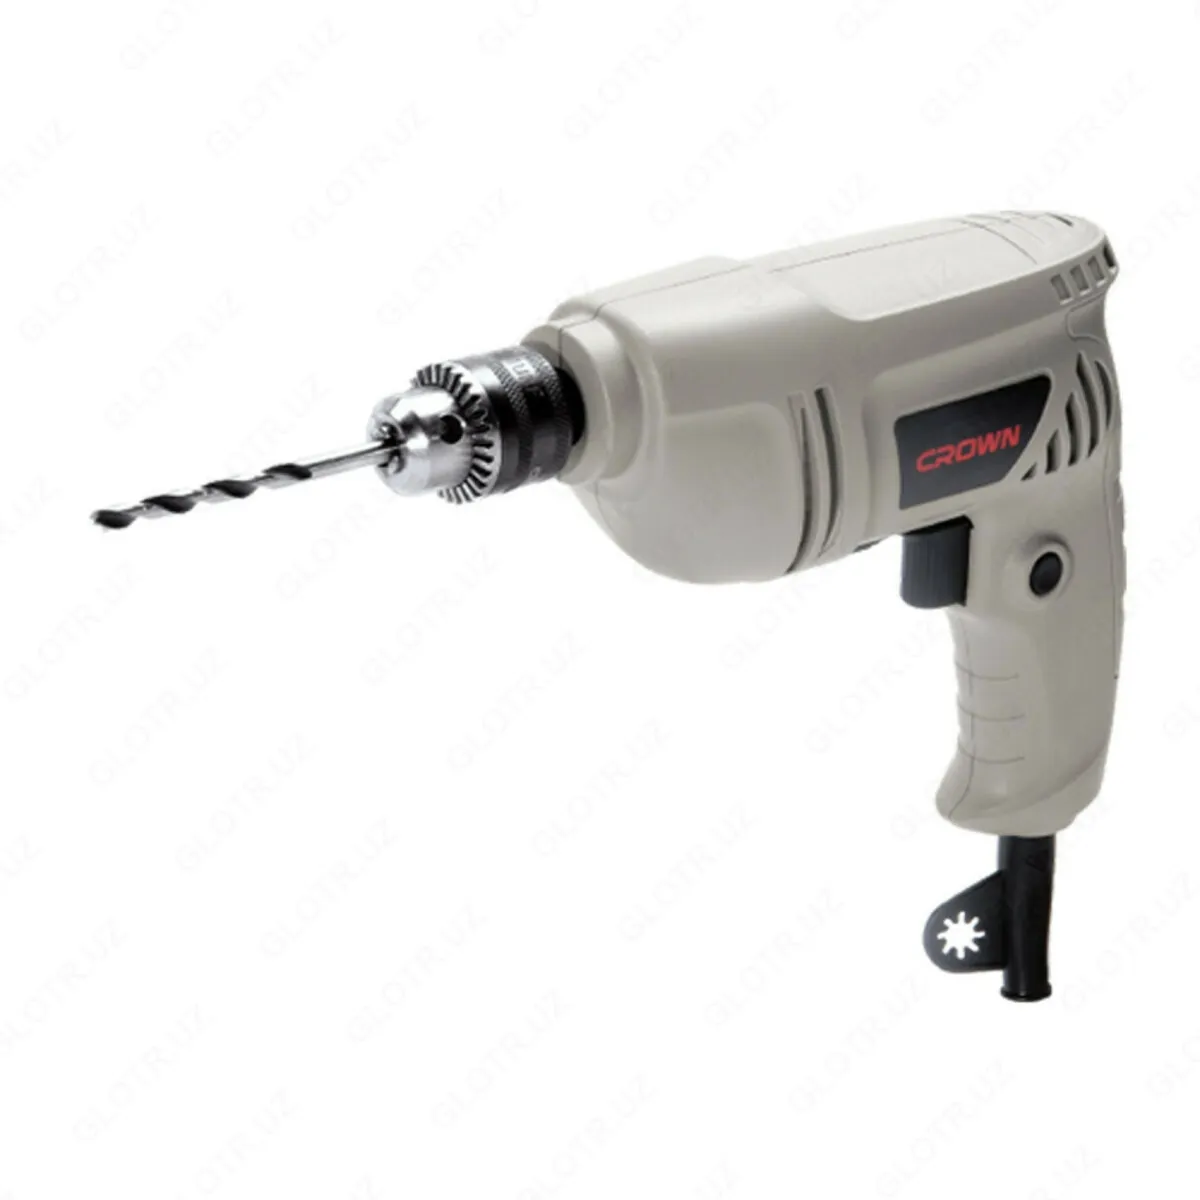 Drill CROWN CT10069 300W 6,5 mm#1